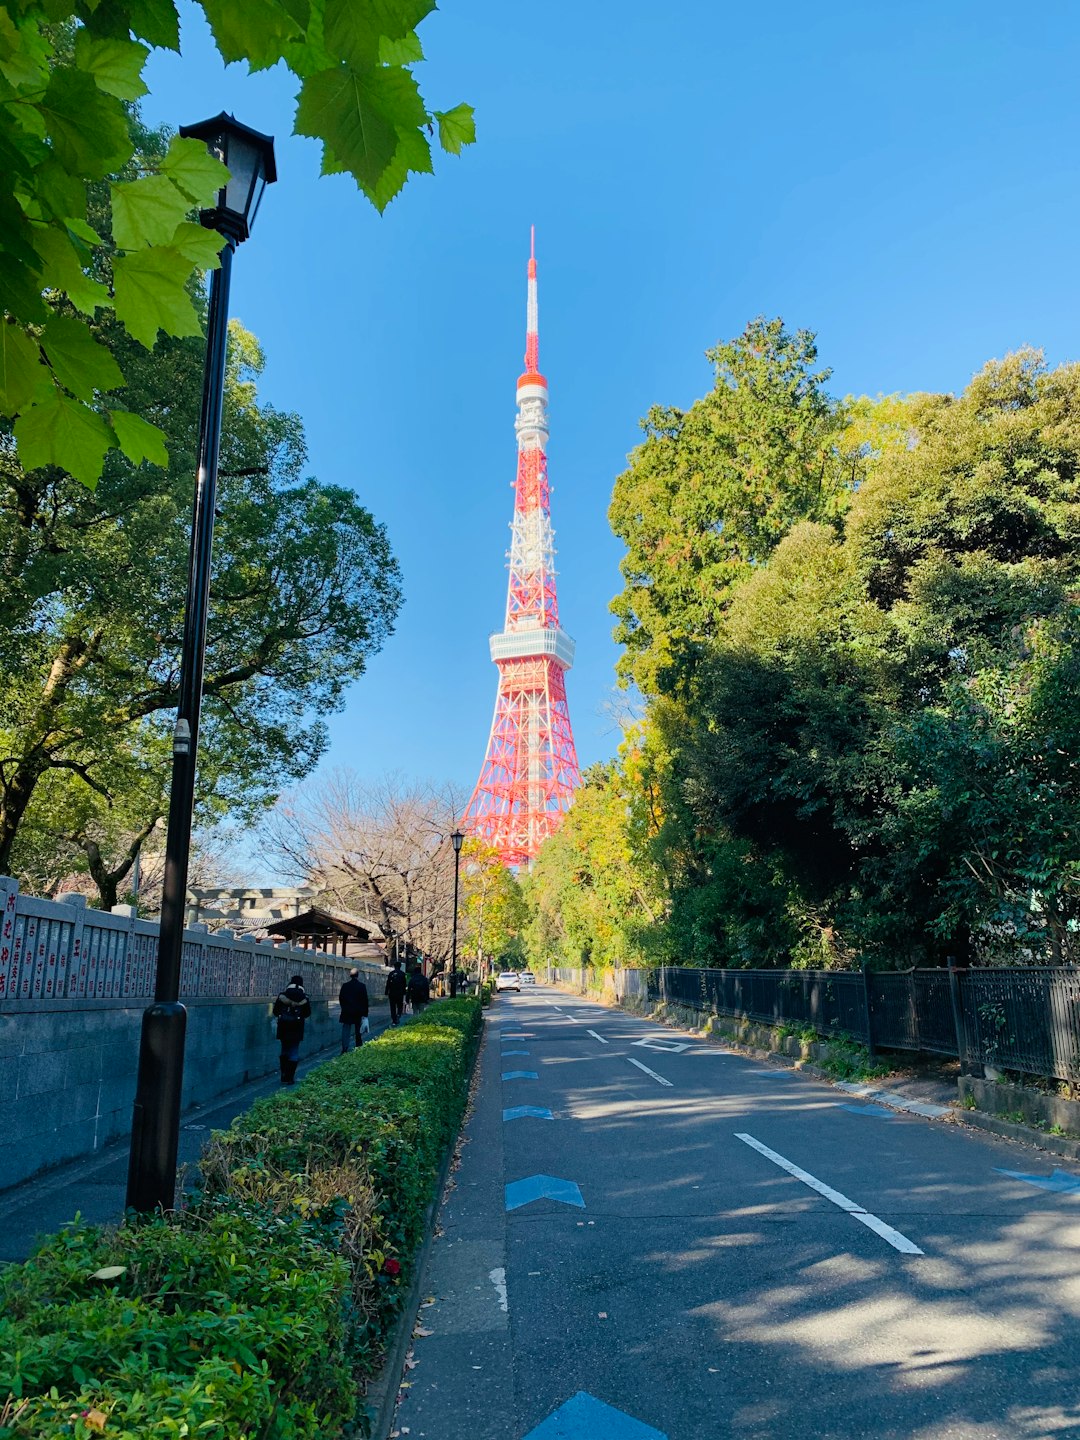 Travel Tips and Stories of Shiba Park in Japan